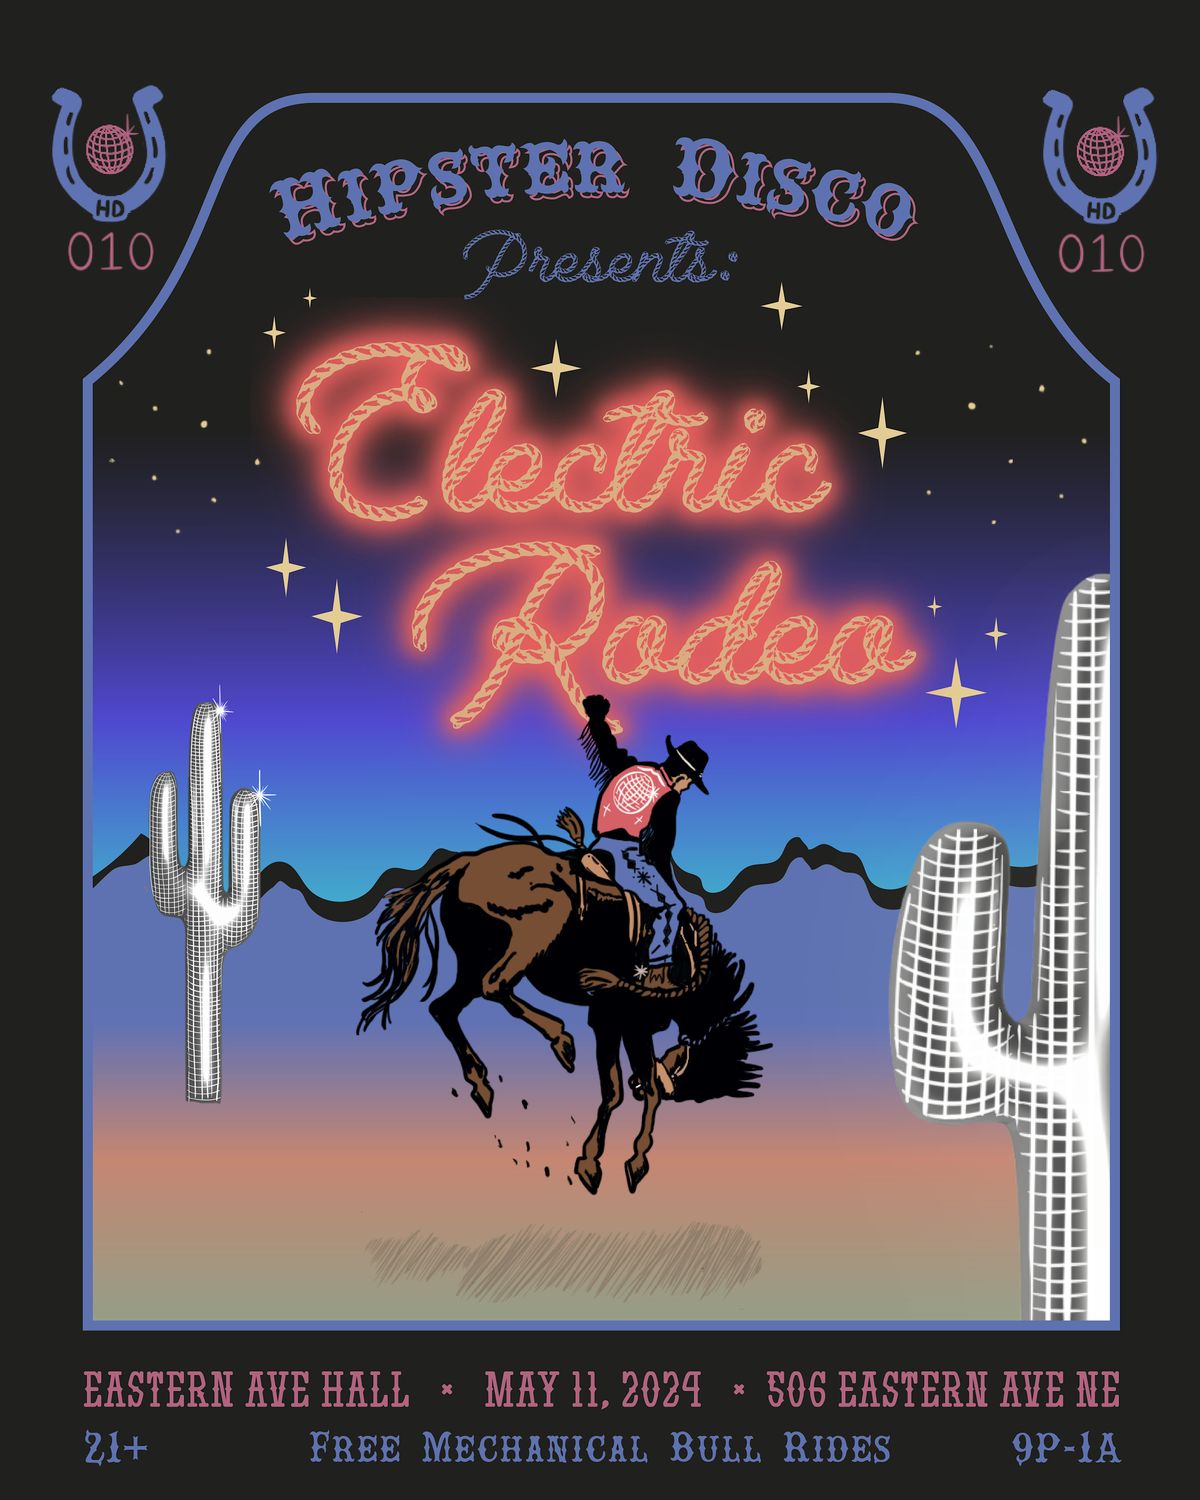 Hipster Disco 010: ELECTRIC RODEO